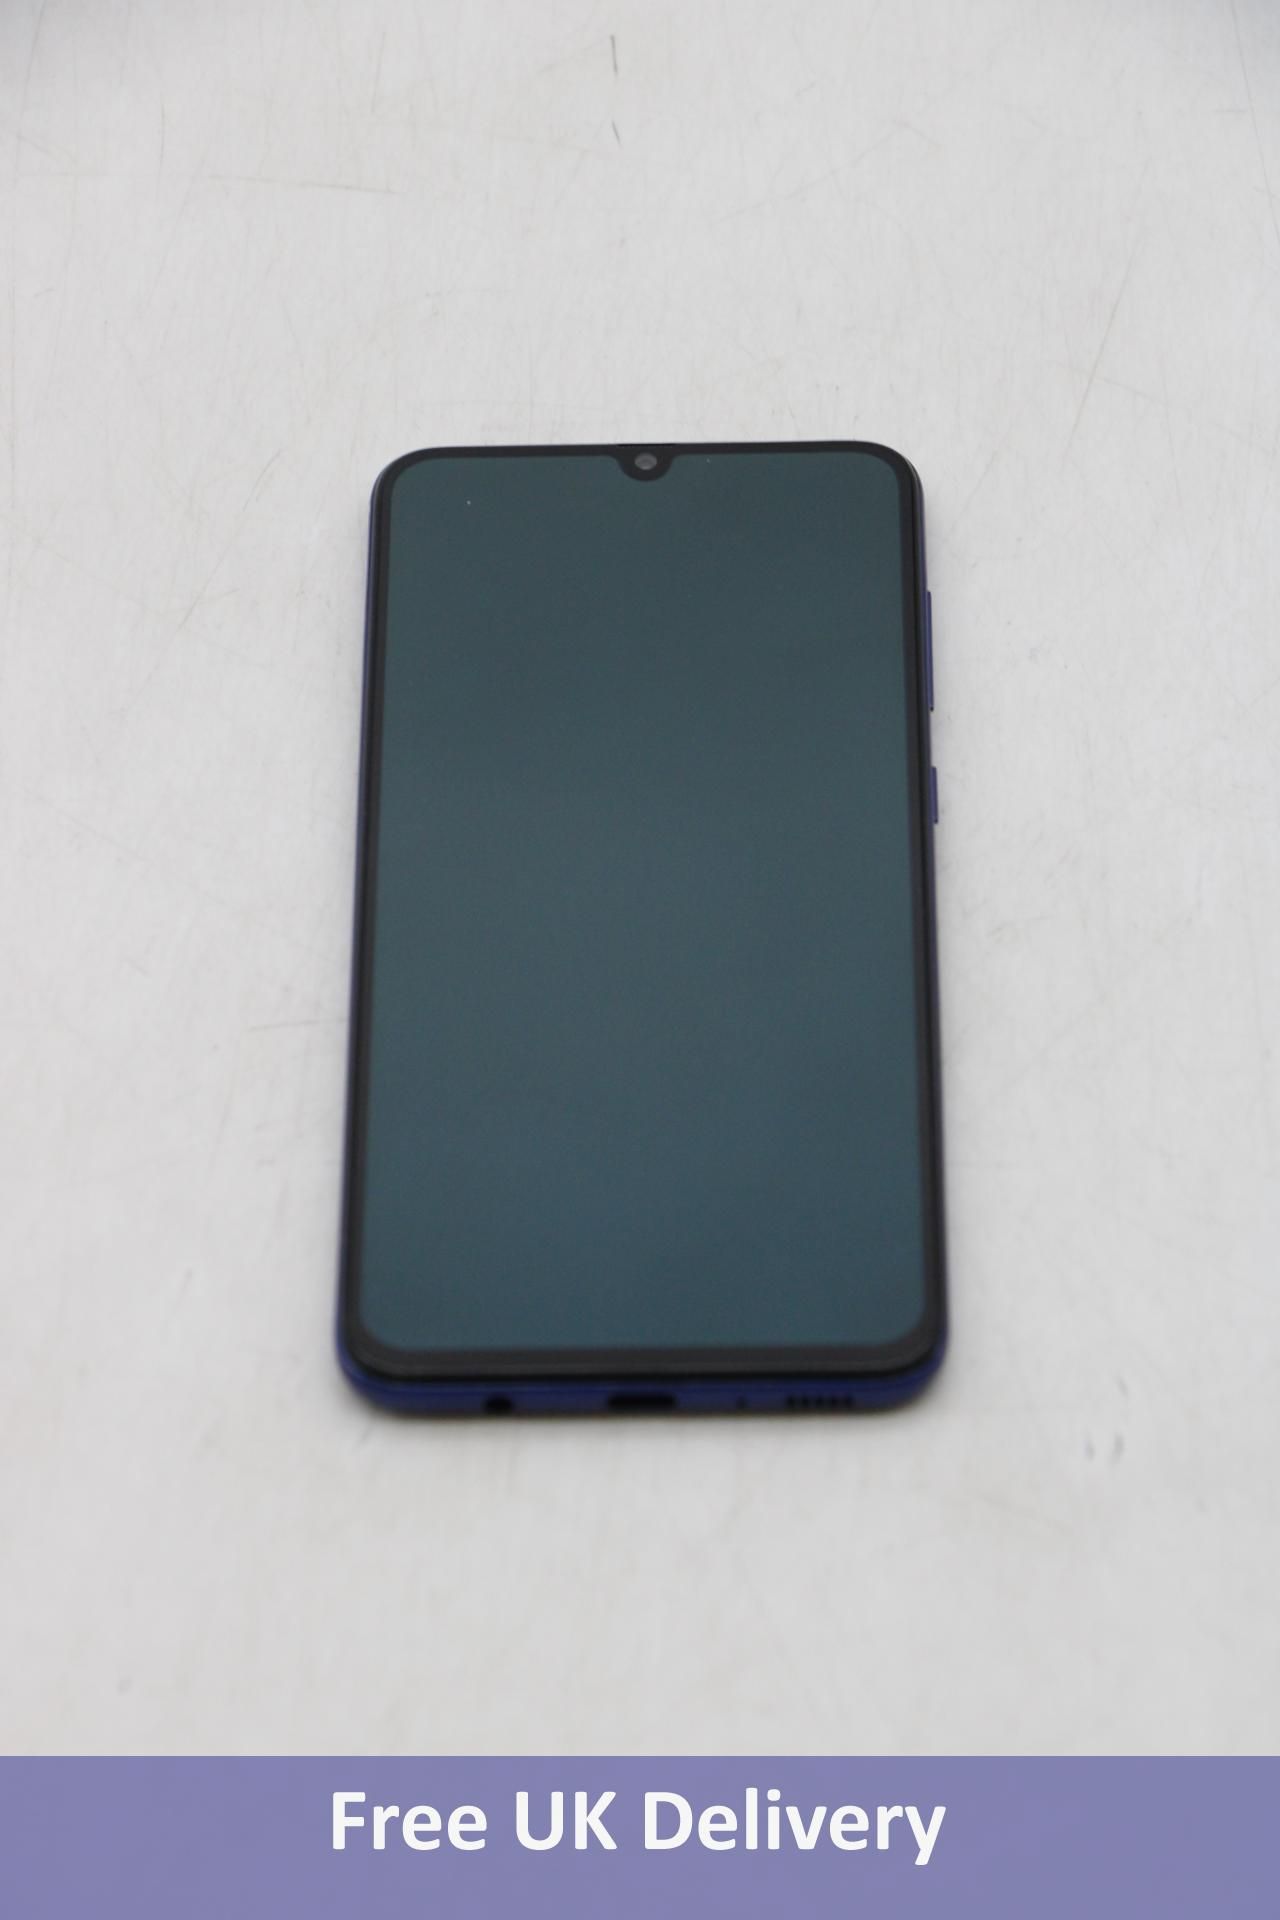 Samsung Galaxy A70 Android Mobile Phone, SM-A705FN/DS 6GB, 128GB, Blue, Used, No box or accessories.